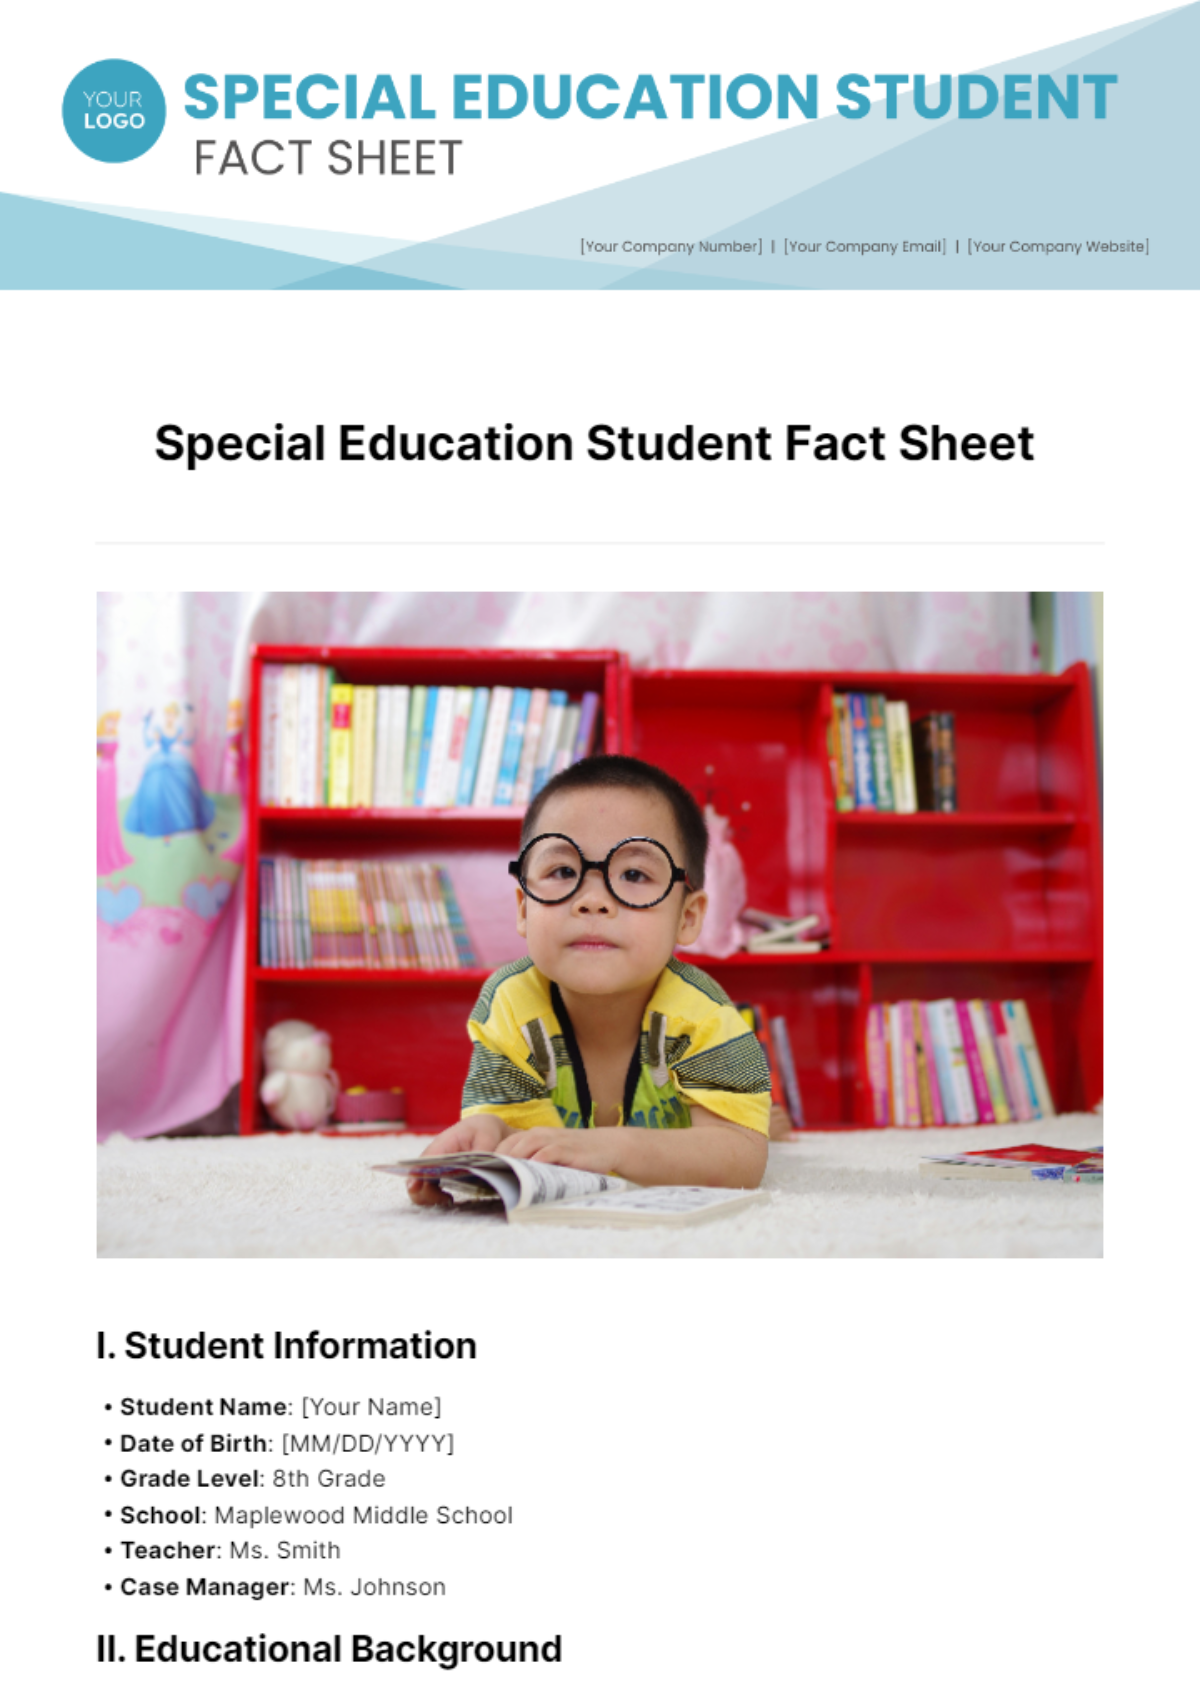 Special Education Student Fact Sheet Template